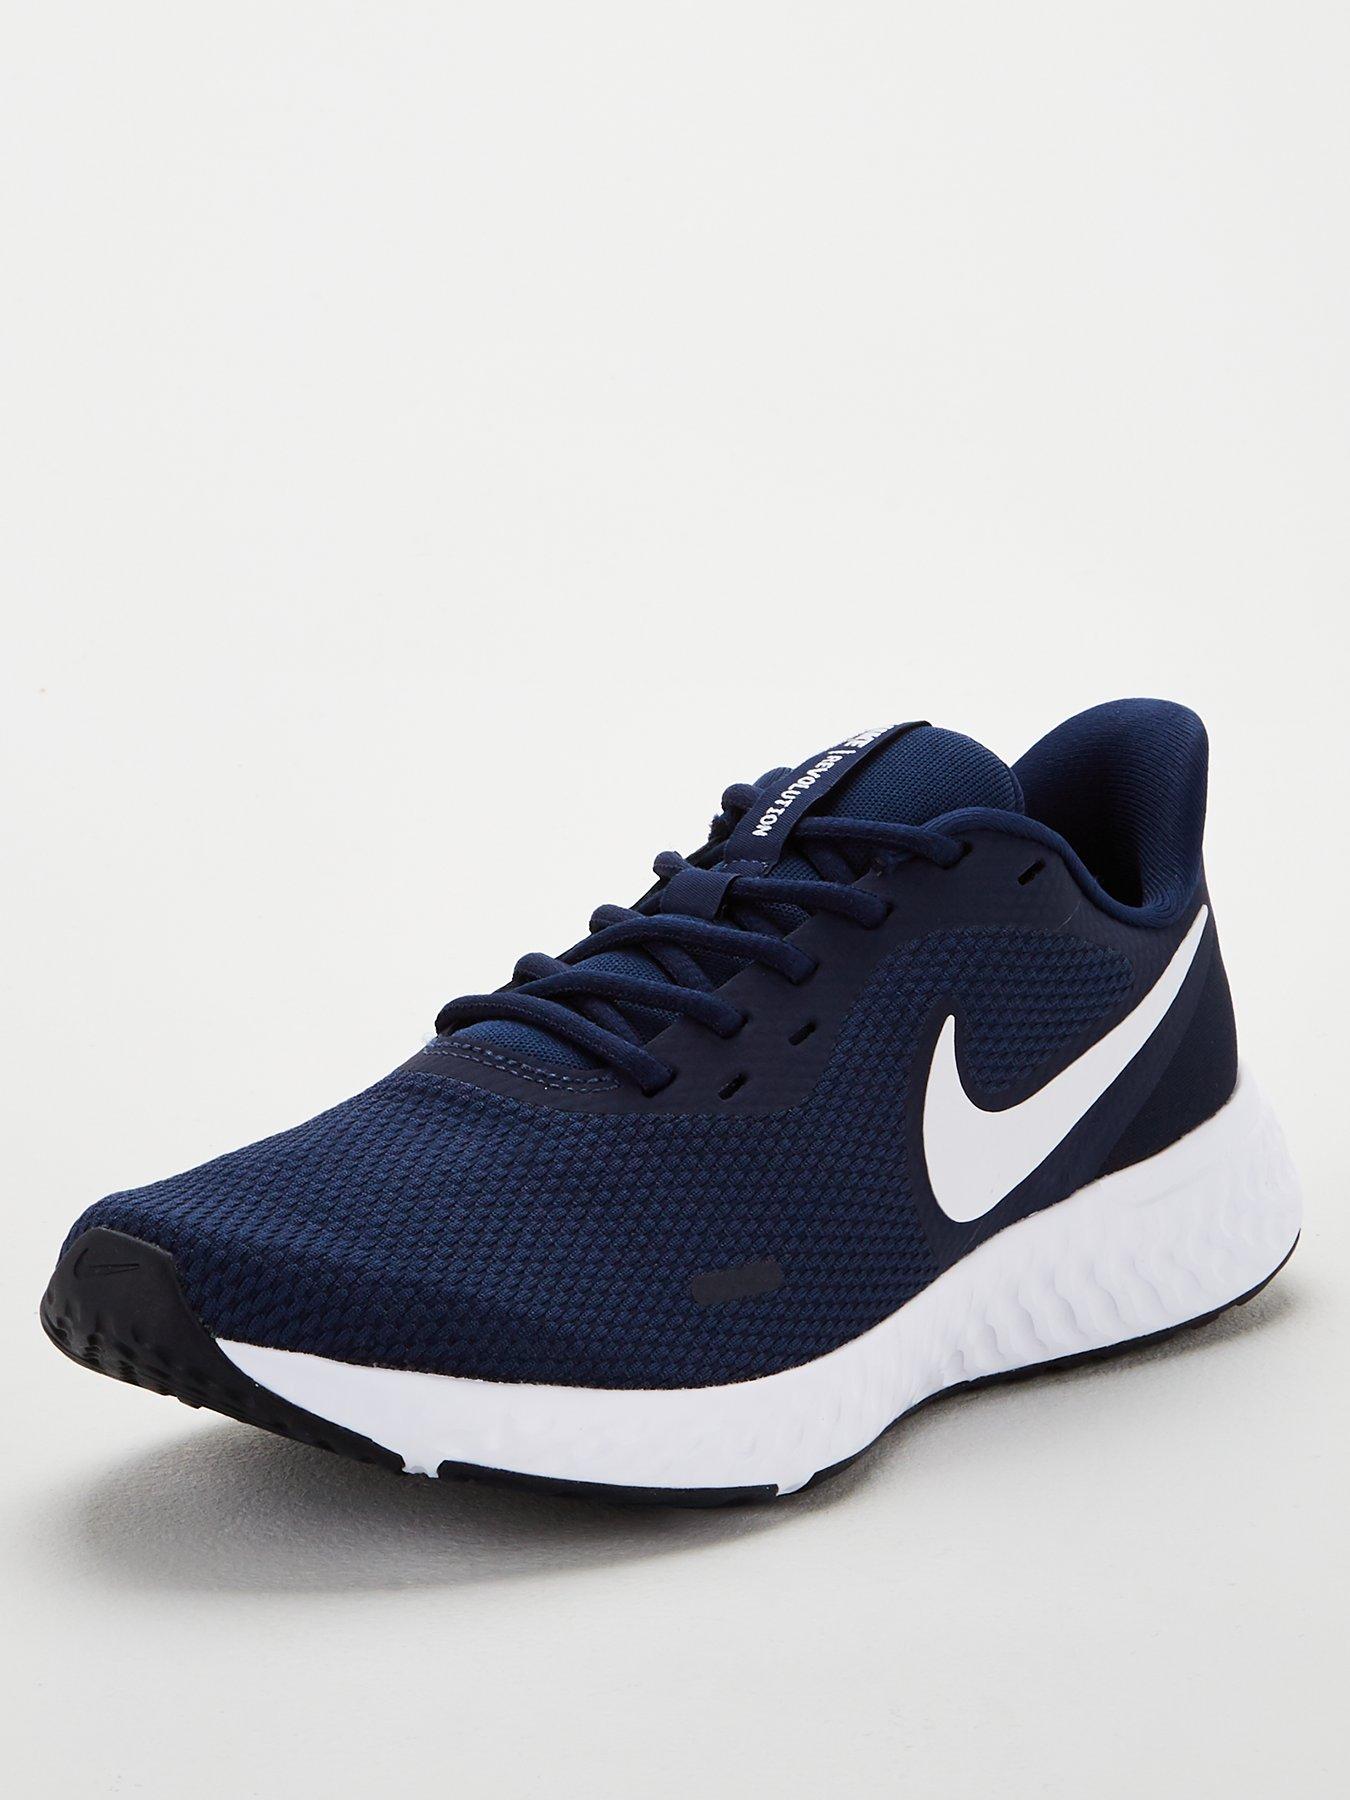 mens nike trainers black and white